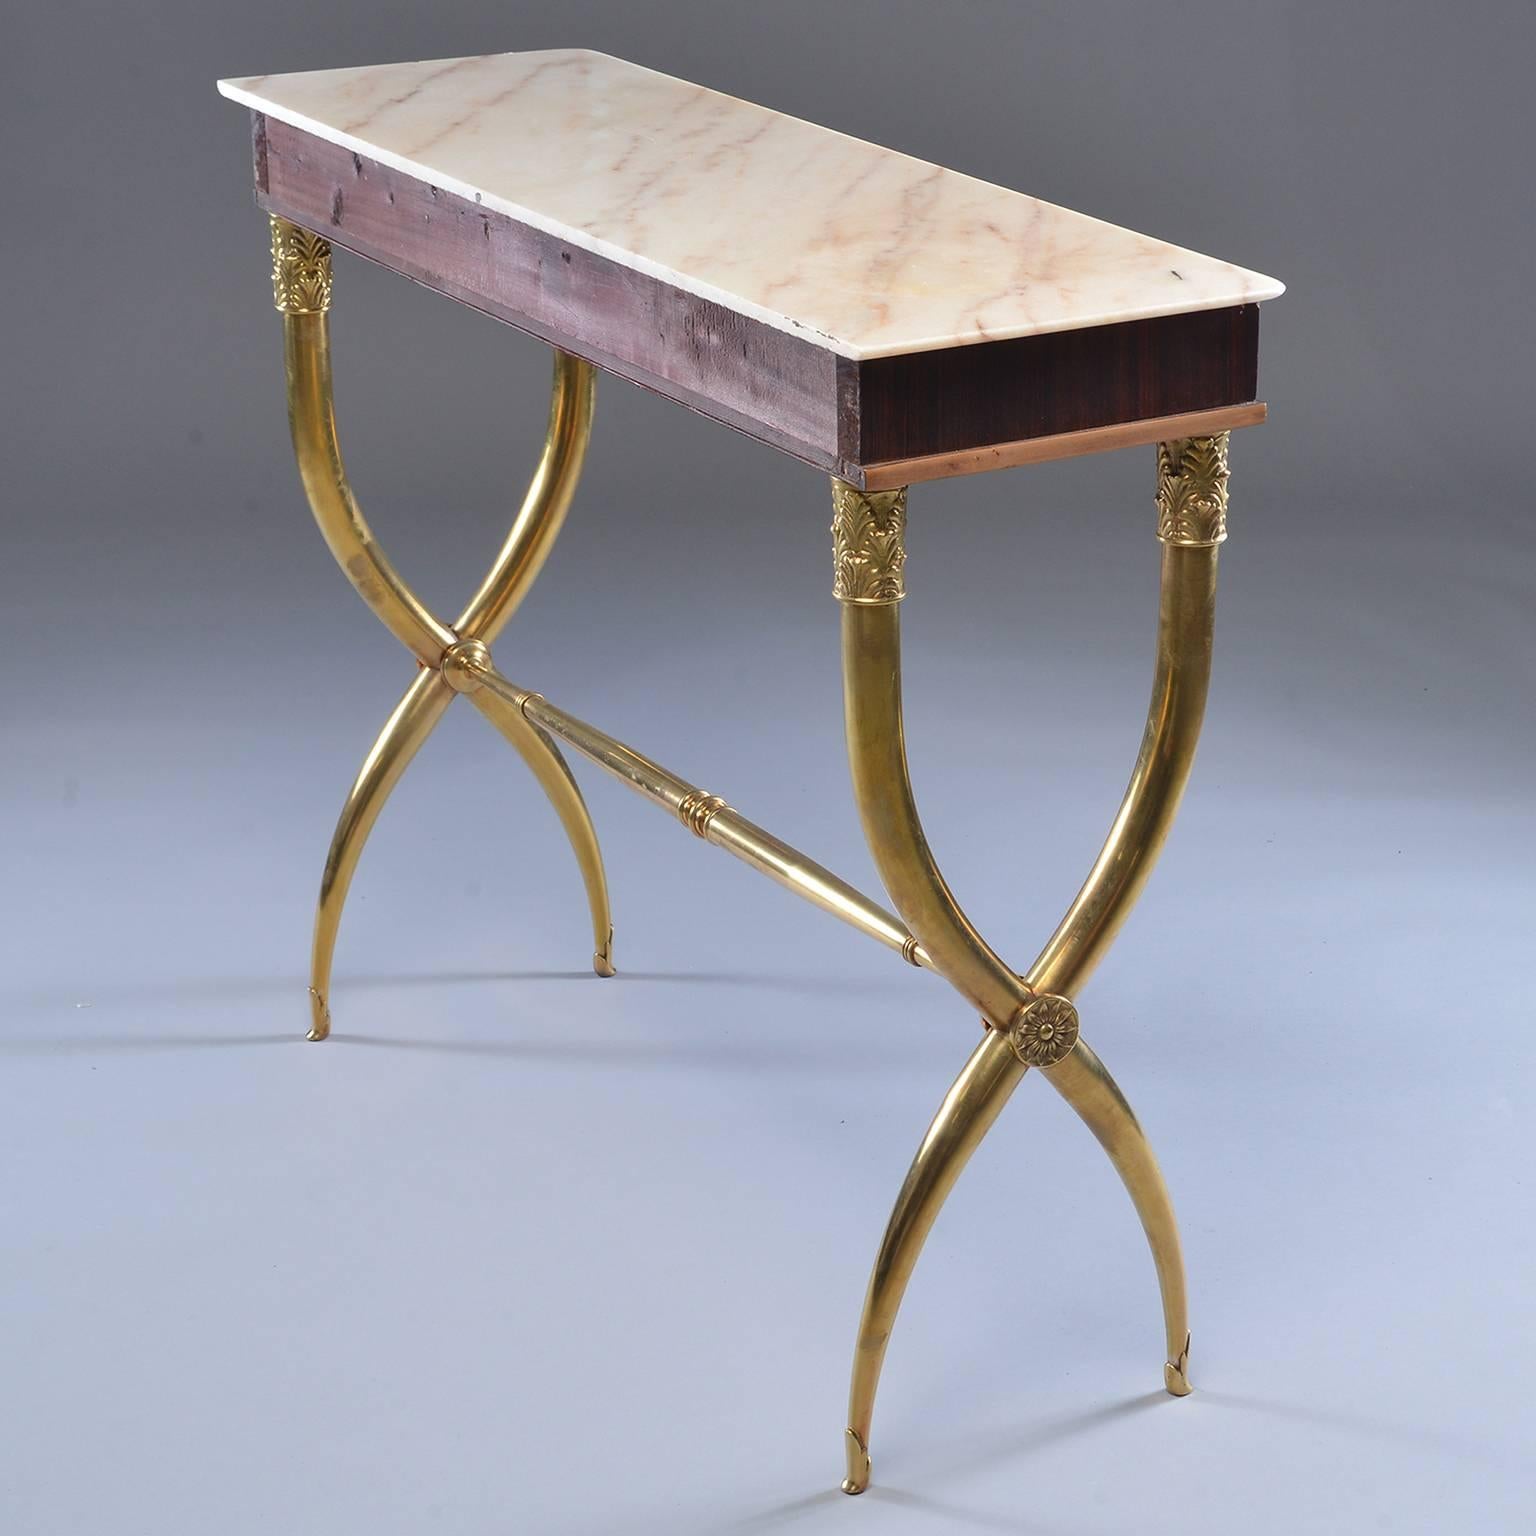 20th Century Italian Brass and Marble Neoclassical Style Console